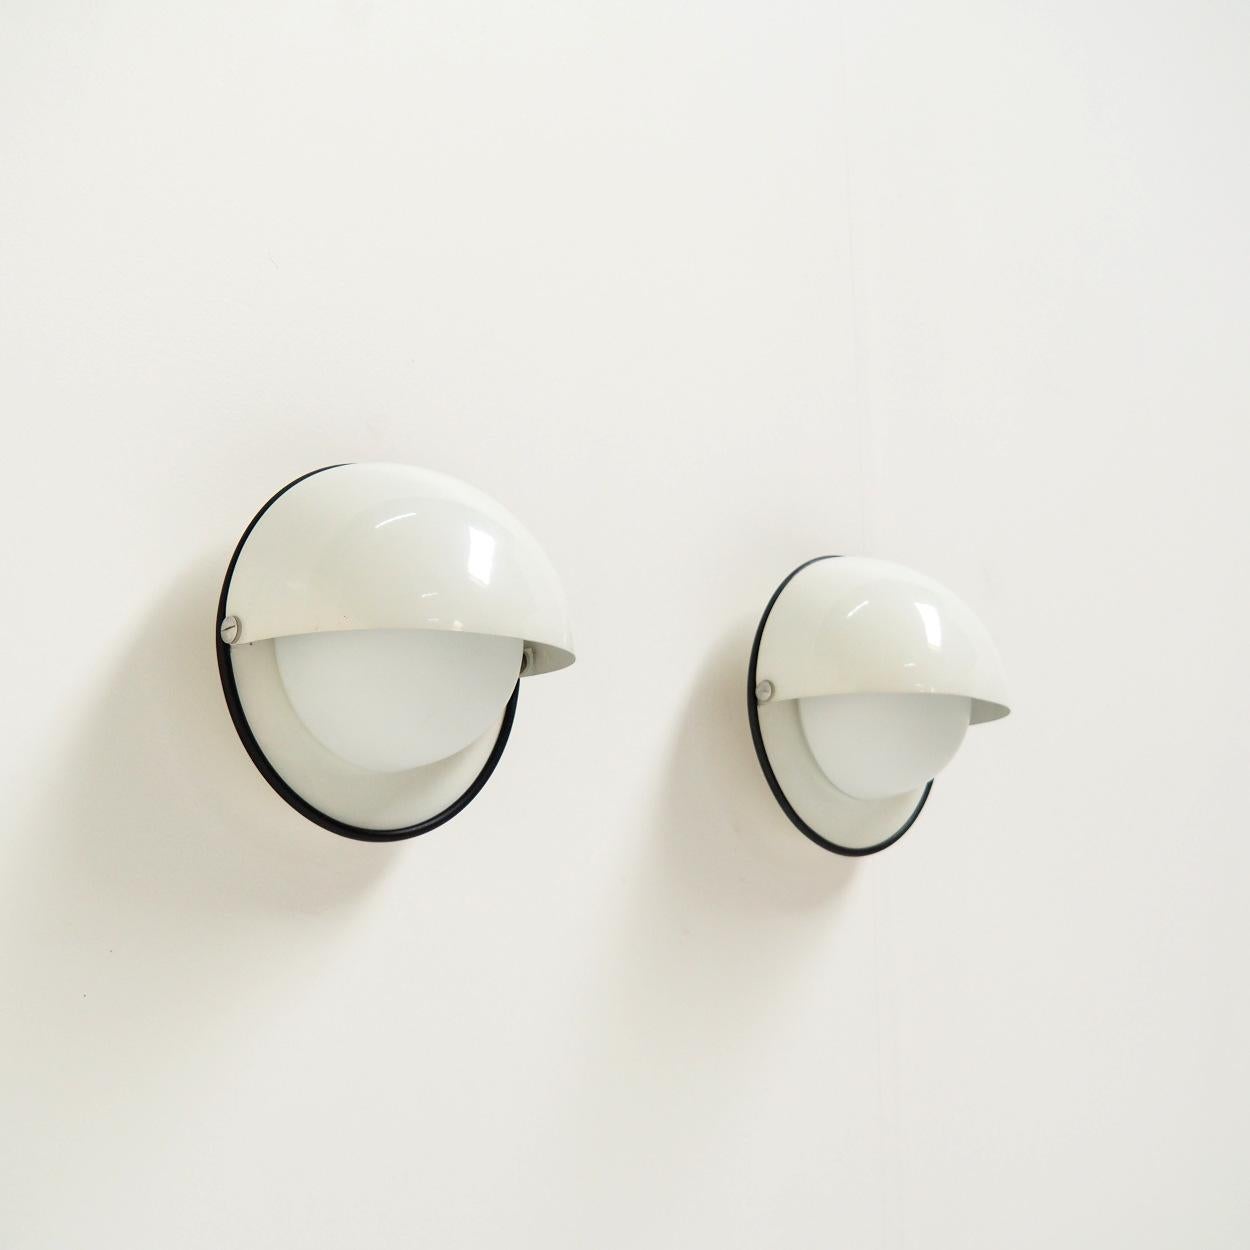 Metal Wall Lights or Flush Mounts Produced by the Dutch Company Dijkstra Lampen, 1960s